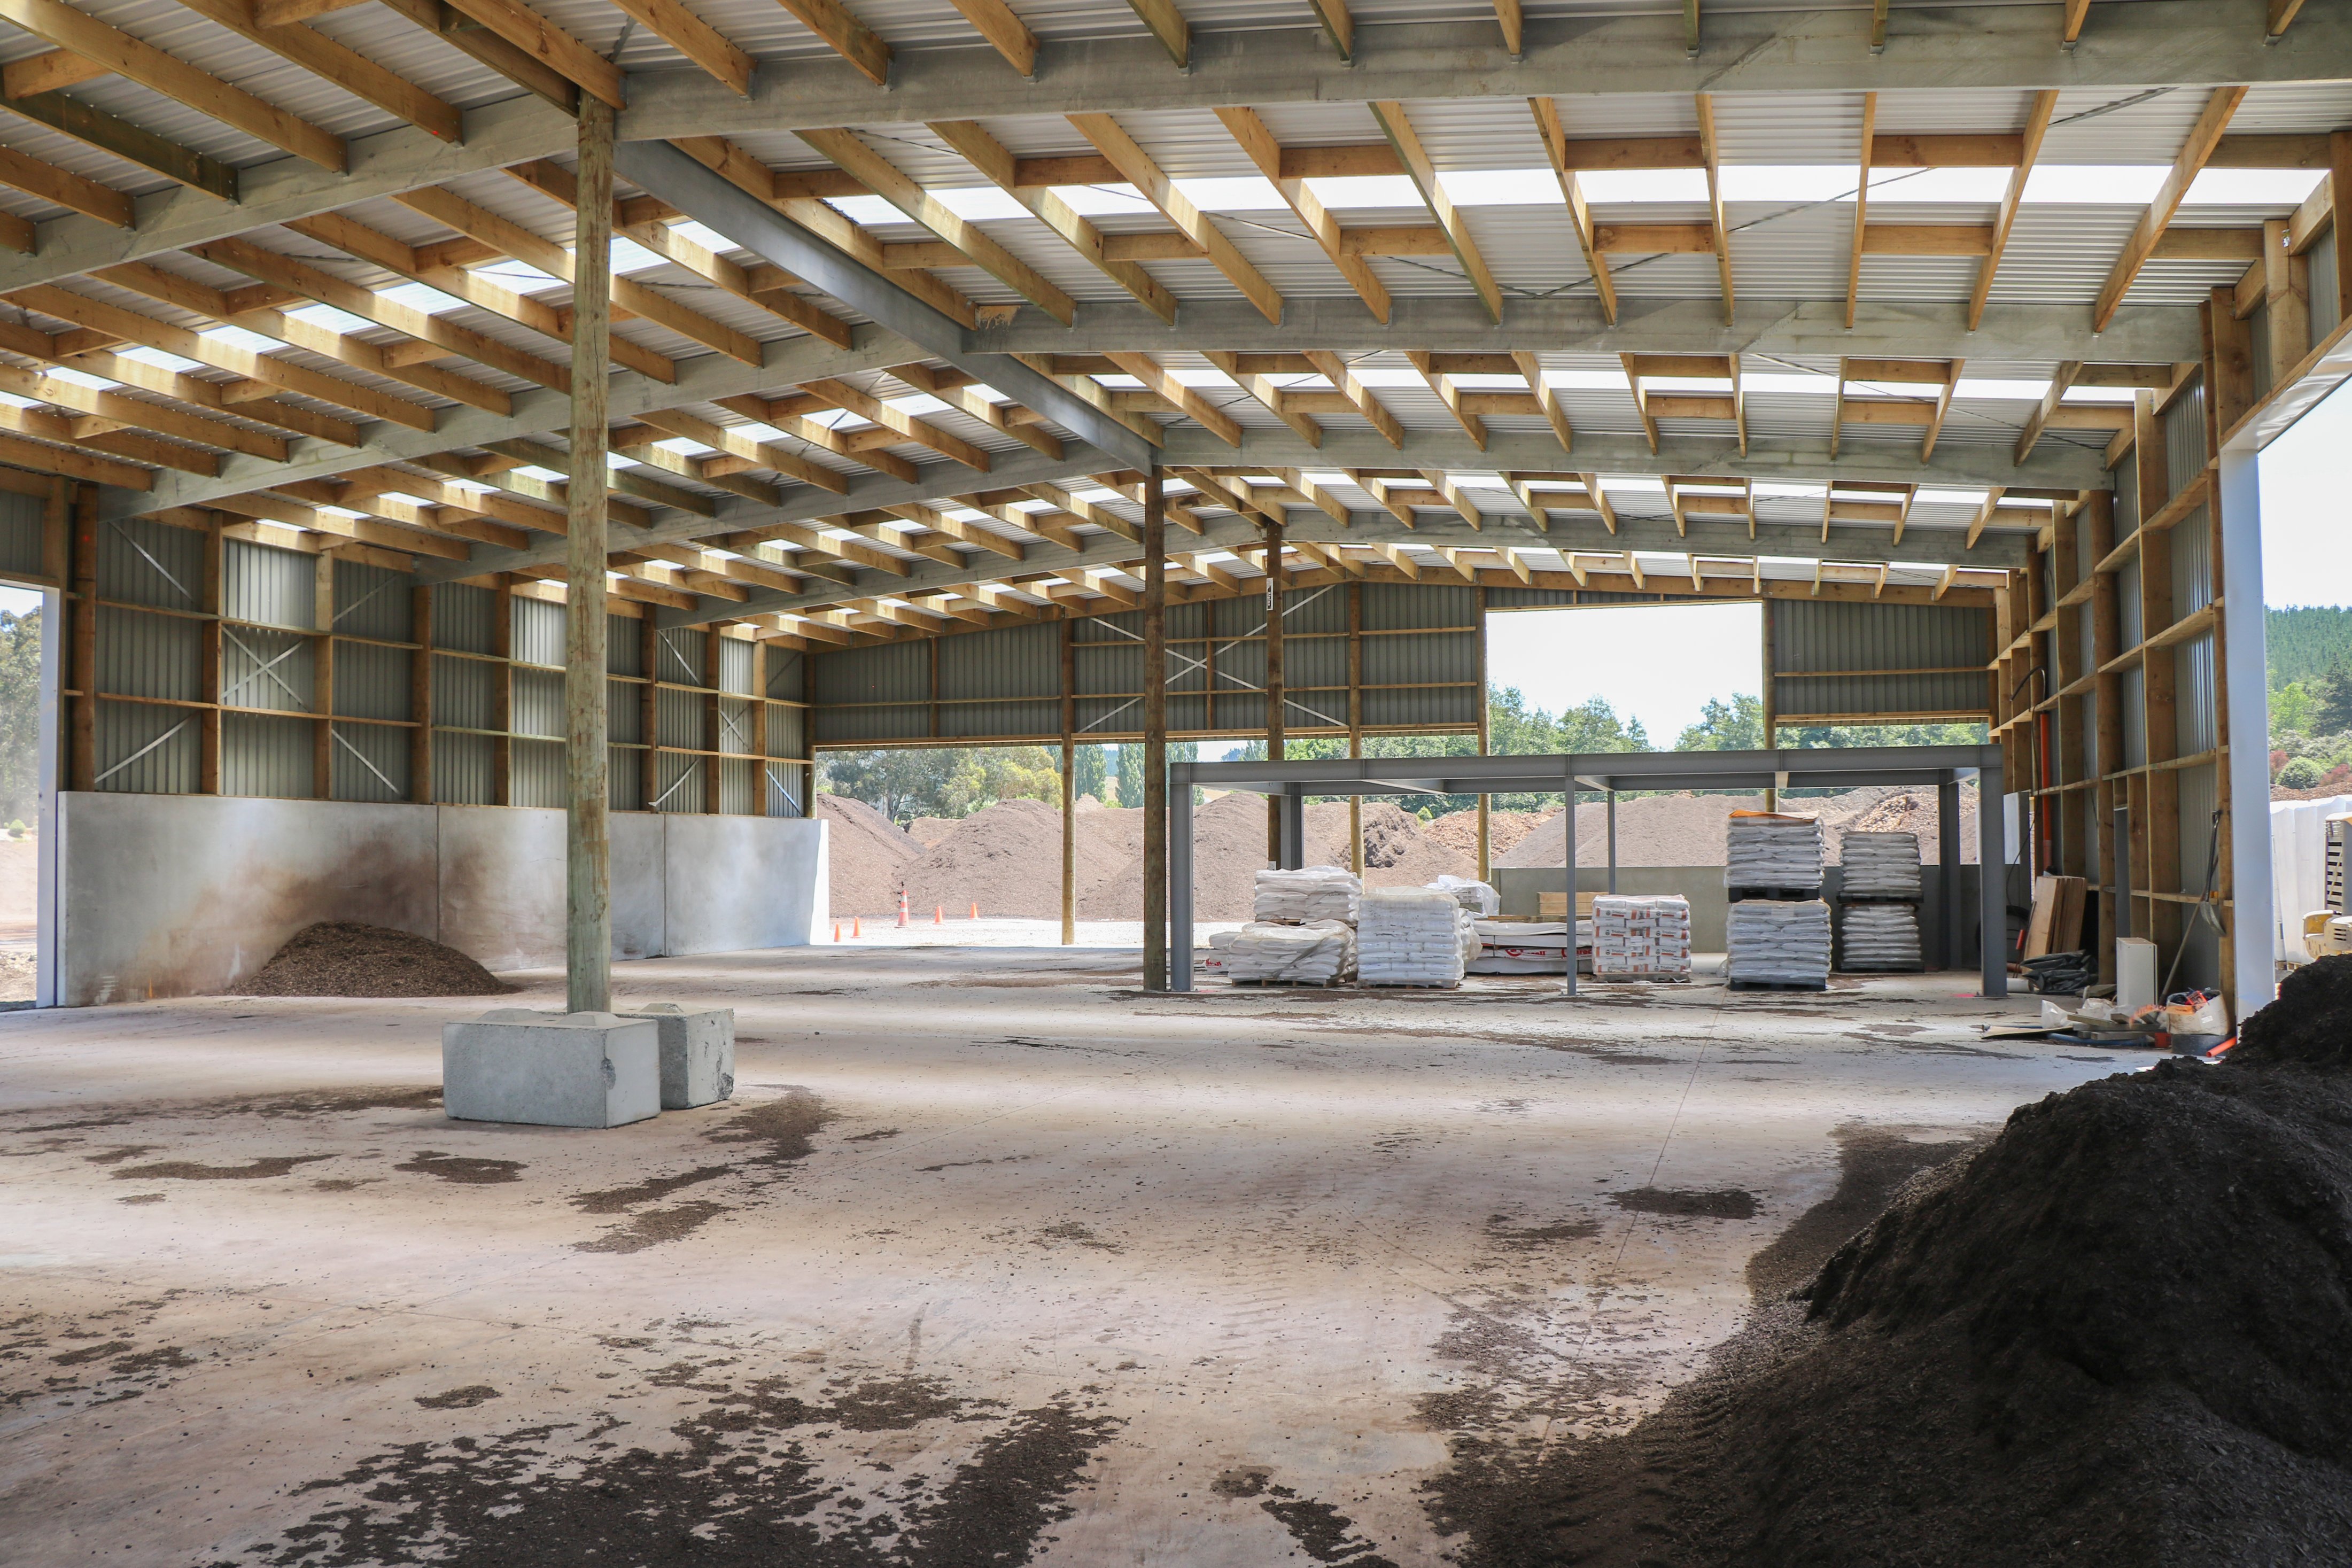 We ensure airflow and ventilation are priorities in a bulk storage shed design